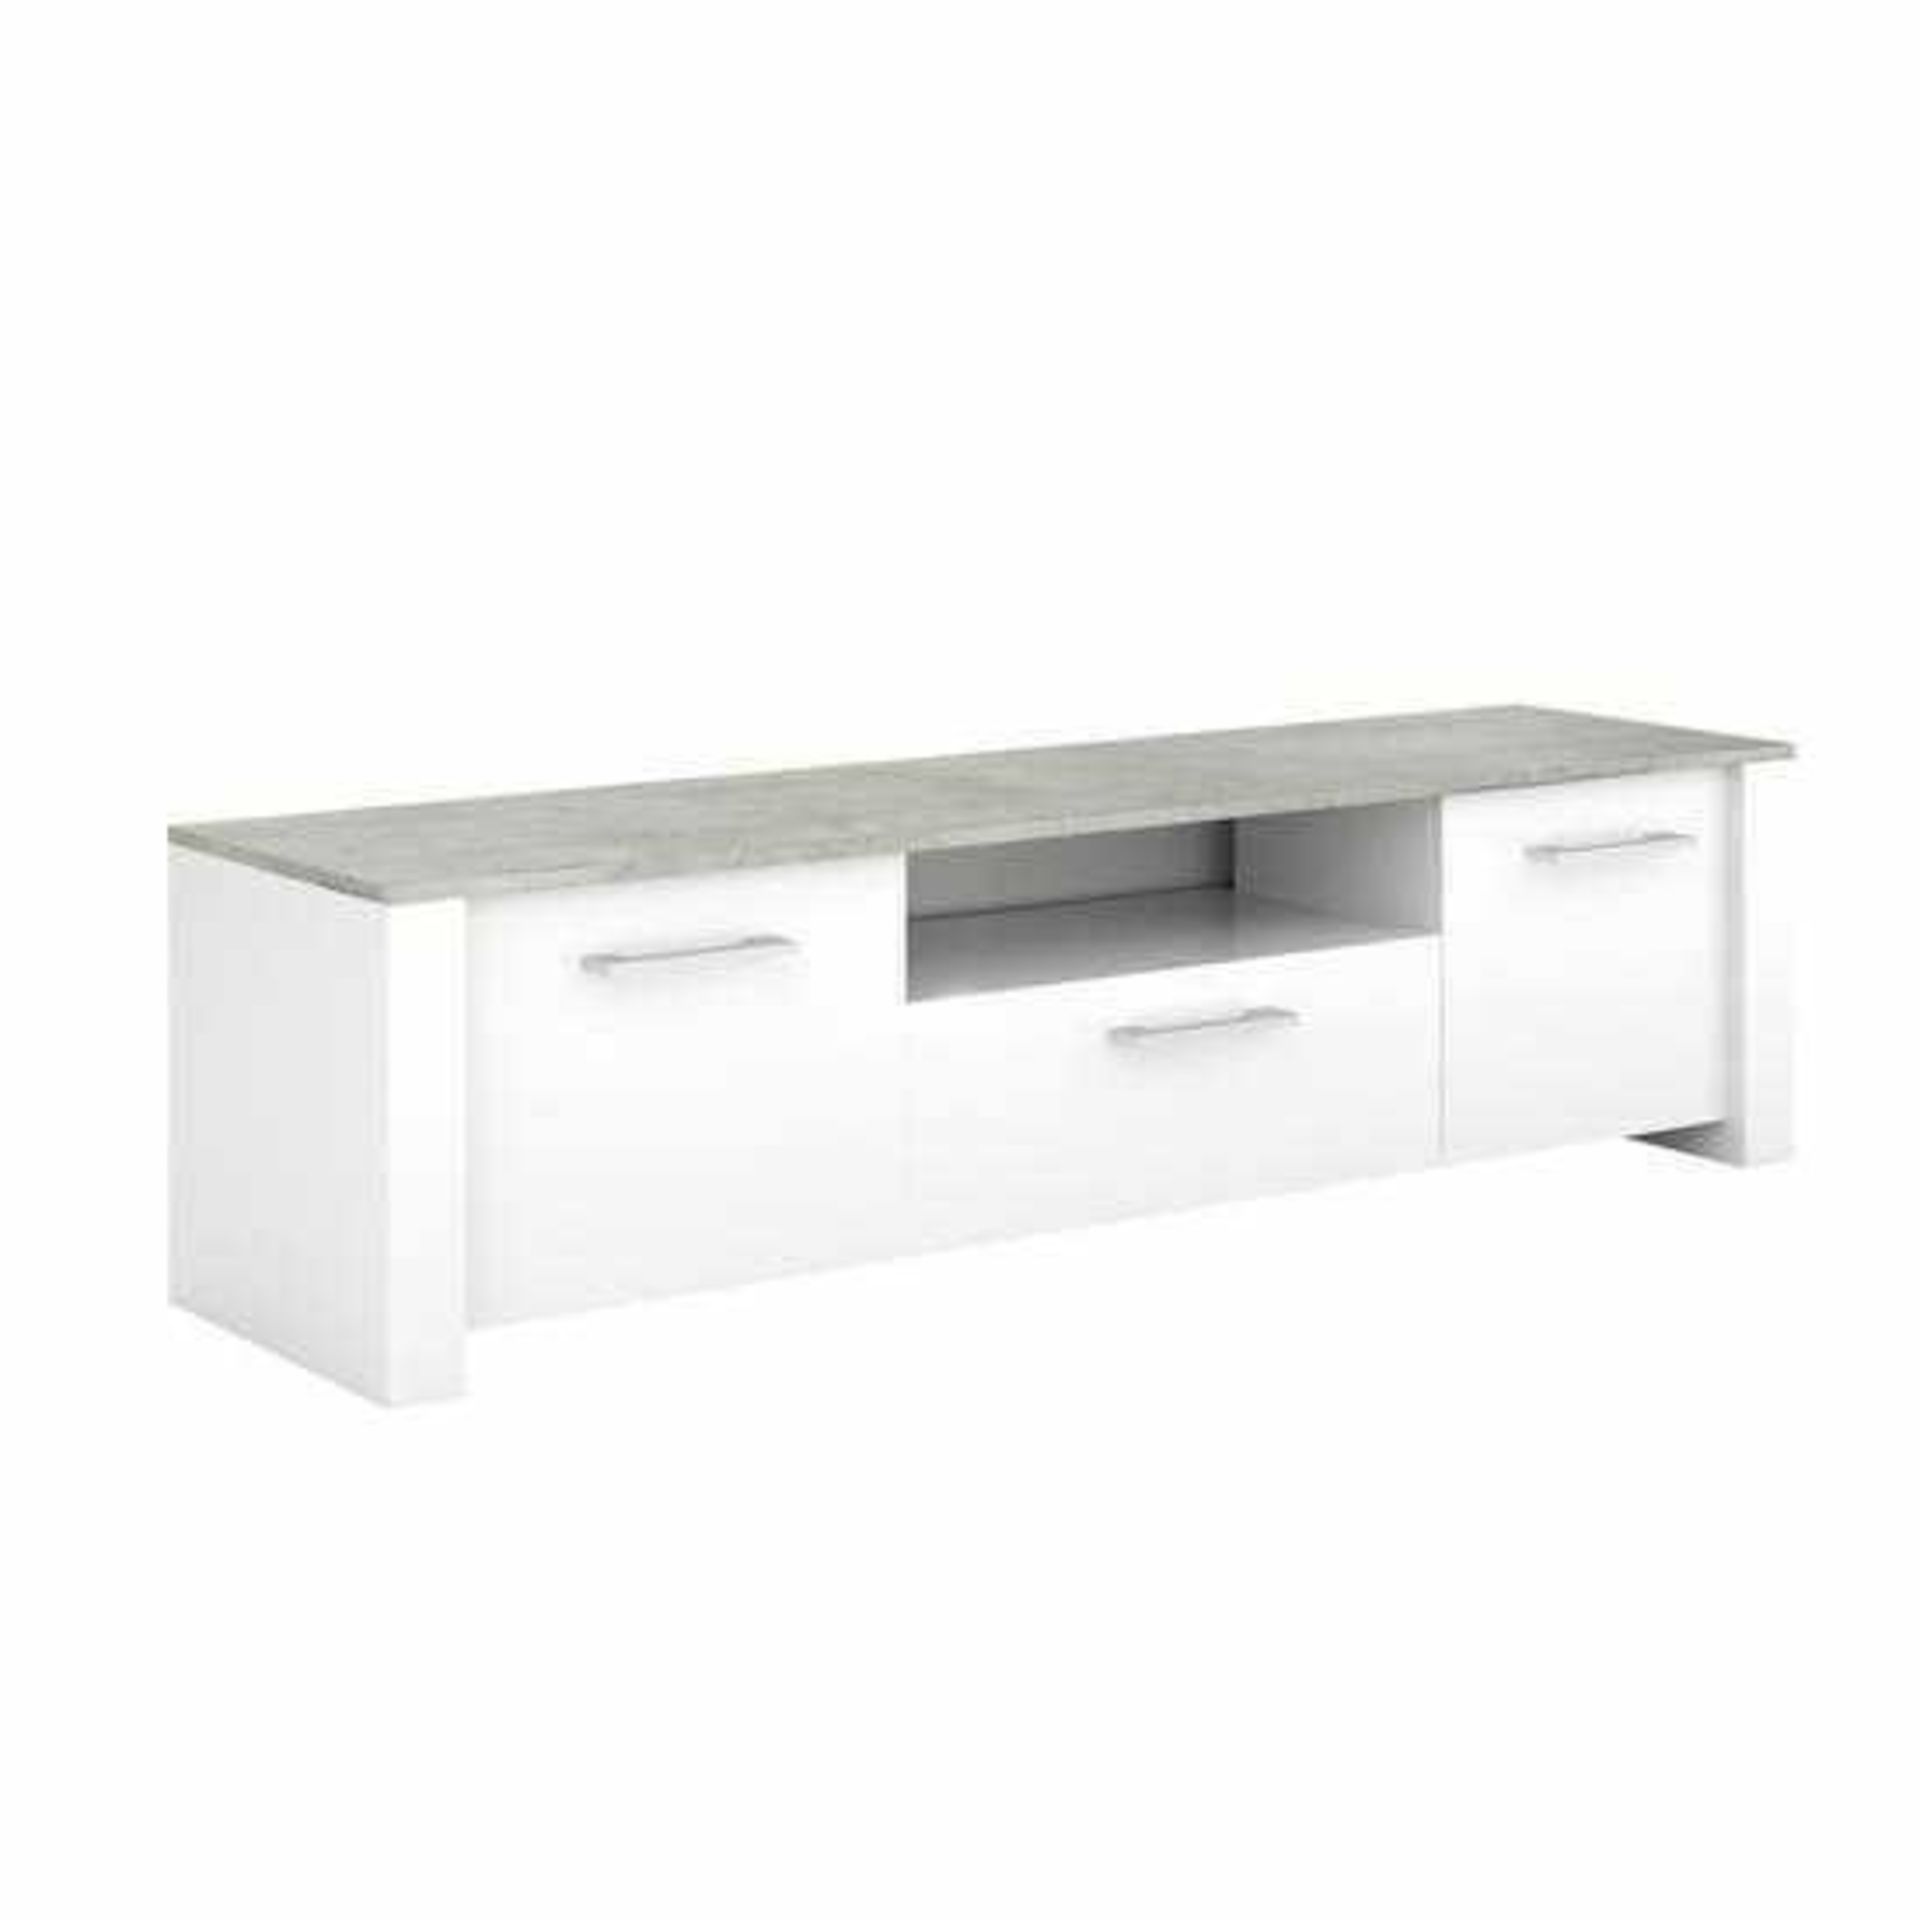 (Db) RRP £225 Lot To Contain One Boxed Odelia Wooden Tv Stand In Pearl White And Woodcorn Concrete.